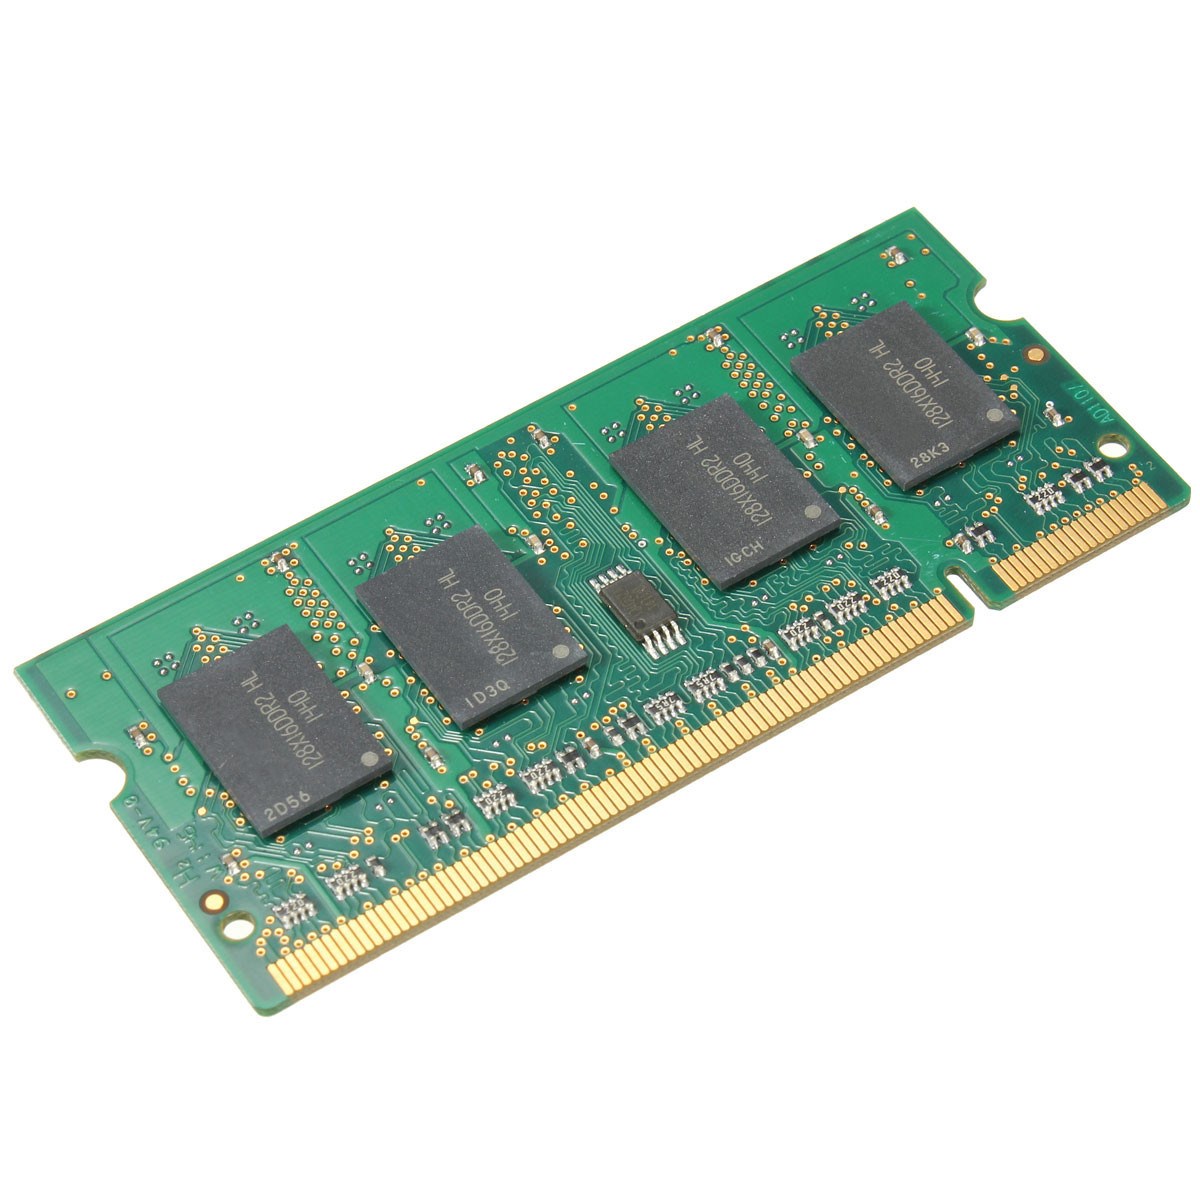 2GB DDR2 533 MHZ PC2-4200 in Memory Compatible with 2GB DDR2 533 RAM Memeoy Ram Laptop Notebook for AMD for Intel